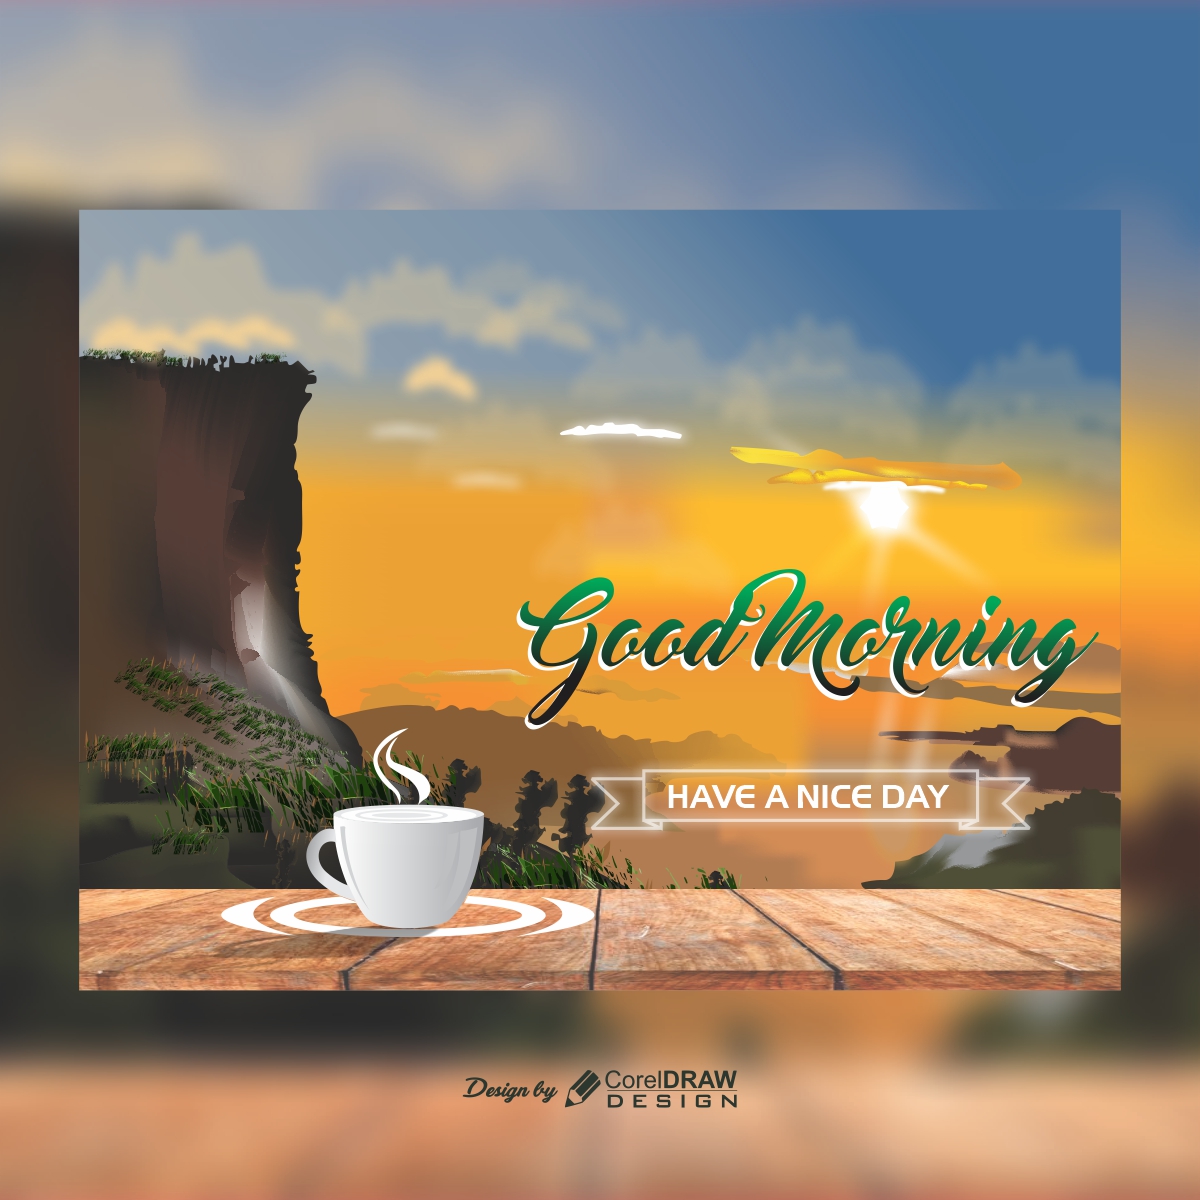 Download Good Morning Wish Beautiful Realistic Background | CorelDraw  Design (Download Free CDR, Vector, Stock Images, Tutorials, Tips & Tricks)